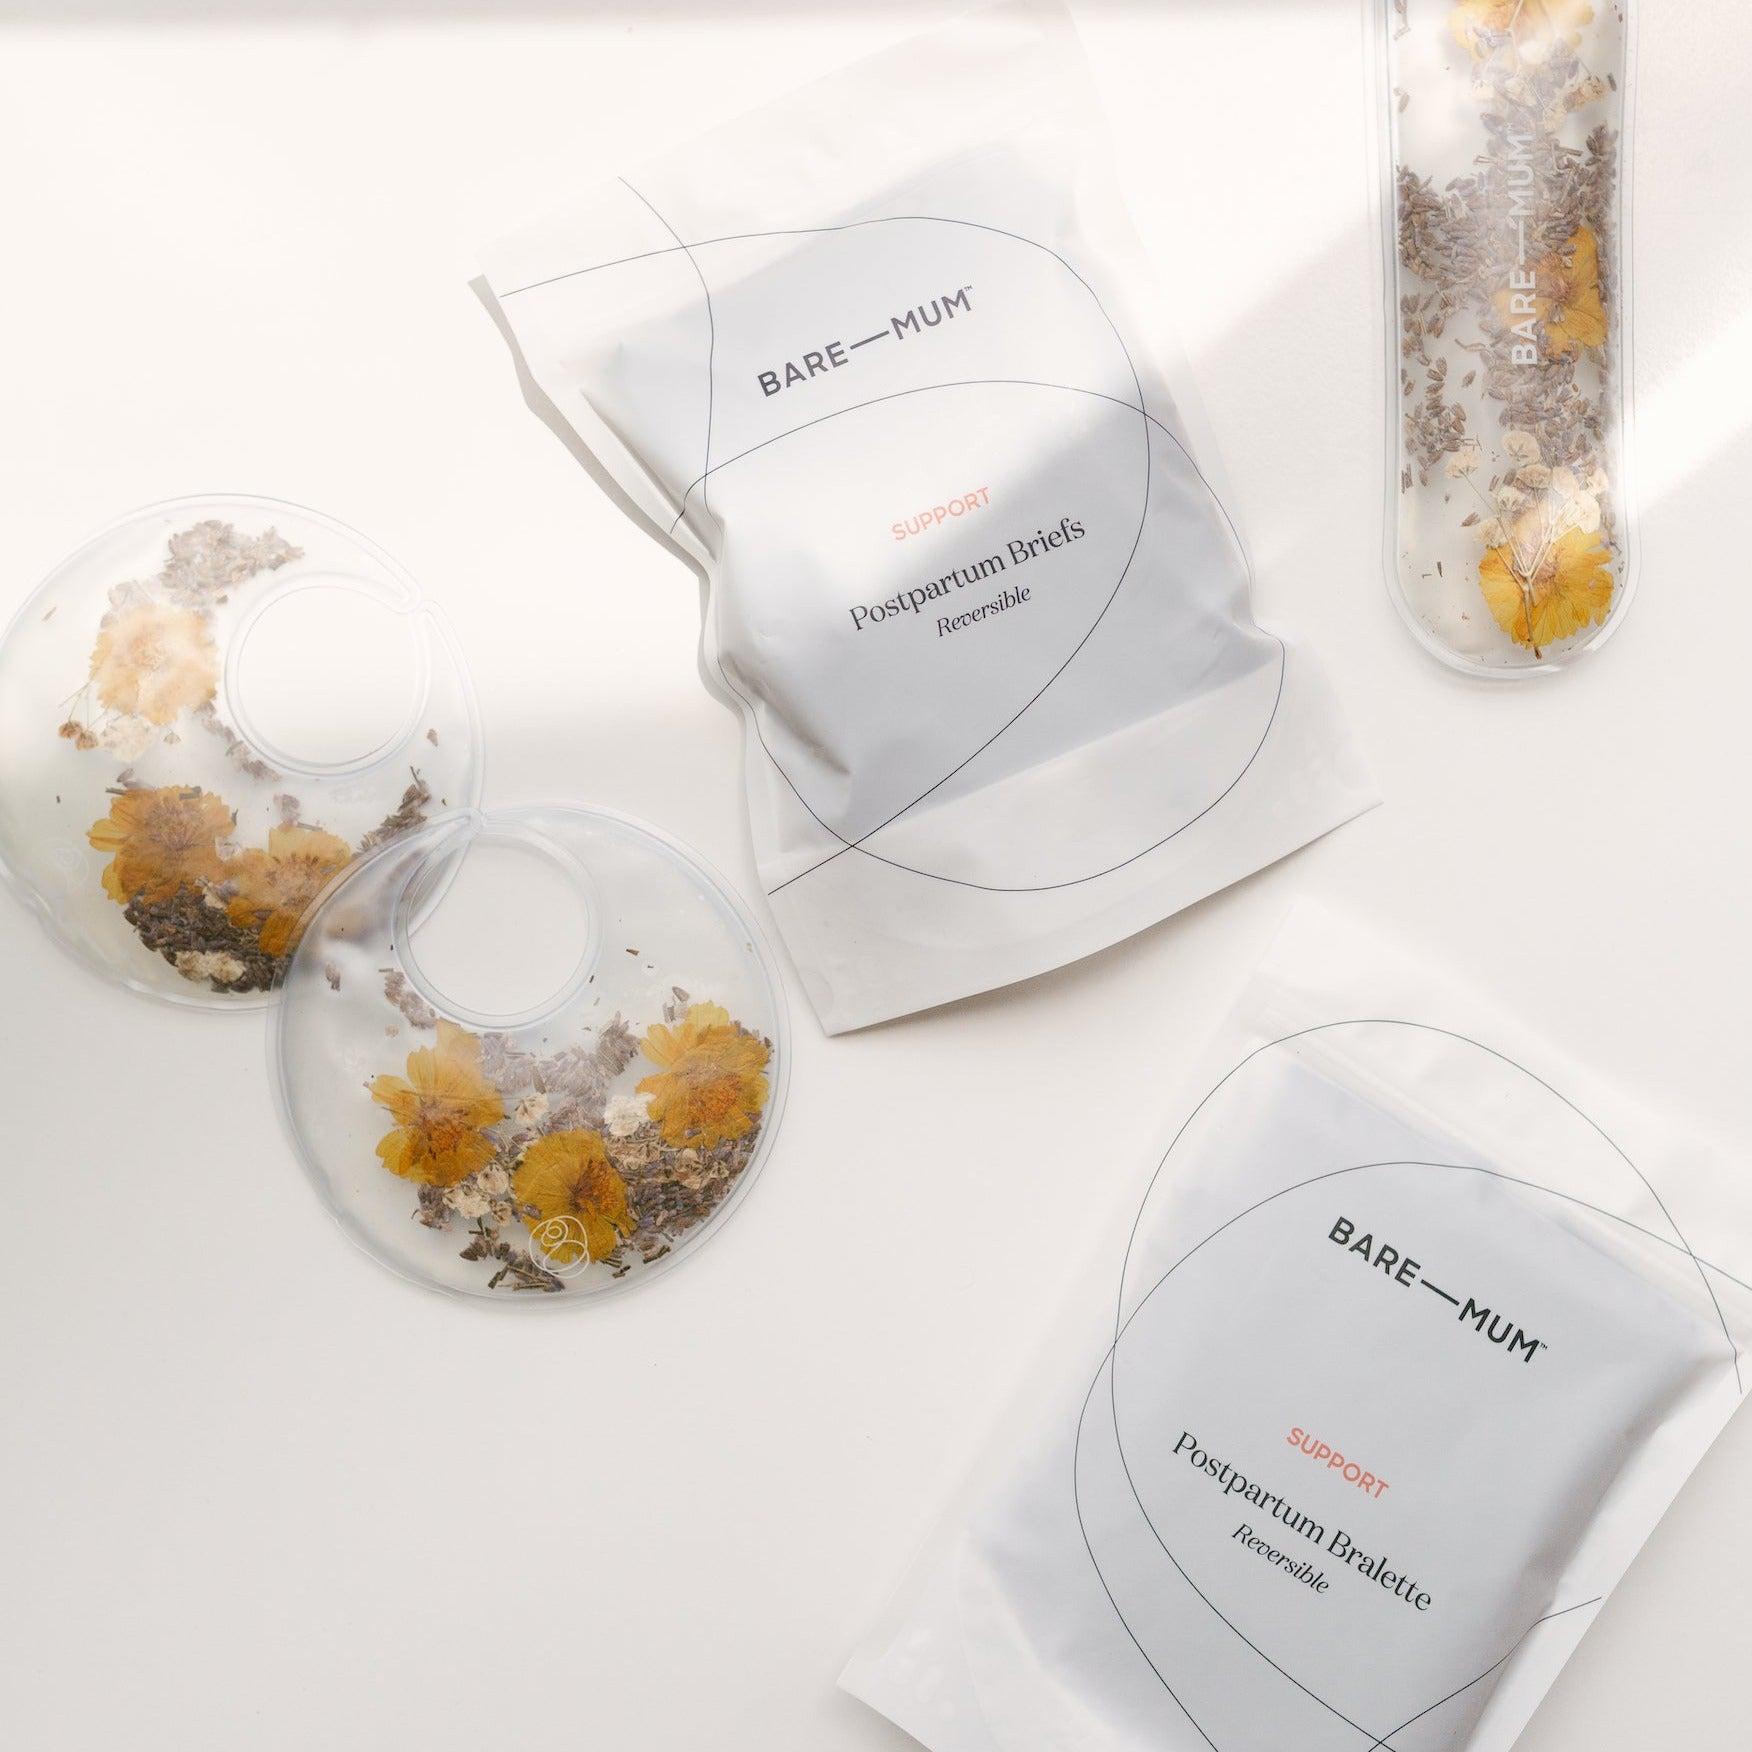 A bag of Bare Mum dried flowers and a packet of Bare Mum powder designed for postpartum recovery and breastfeeding.